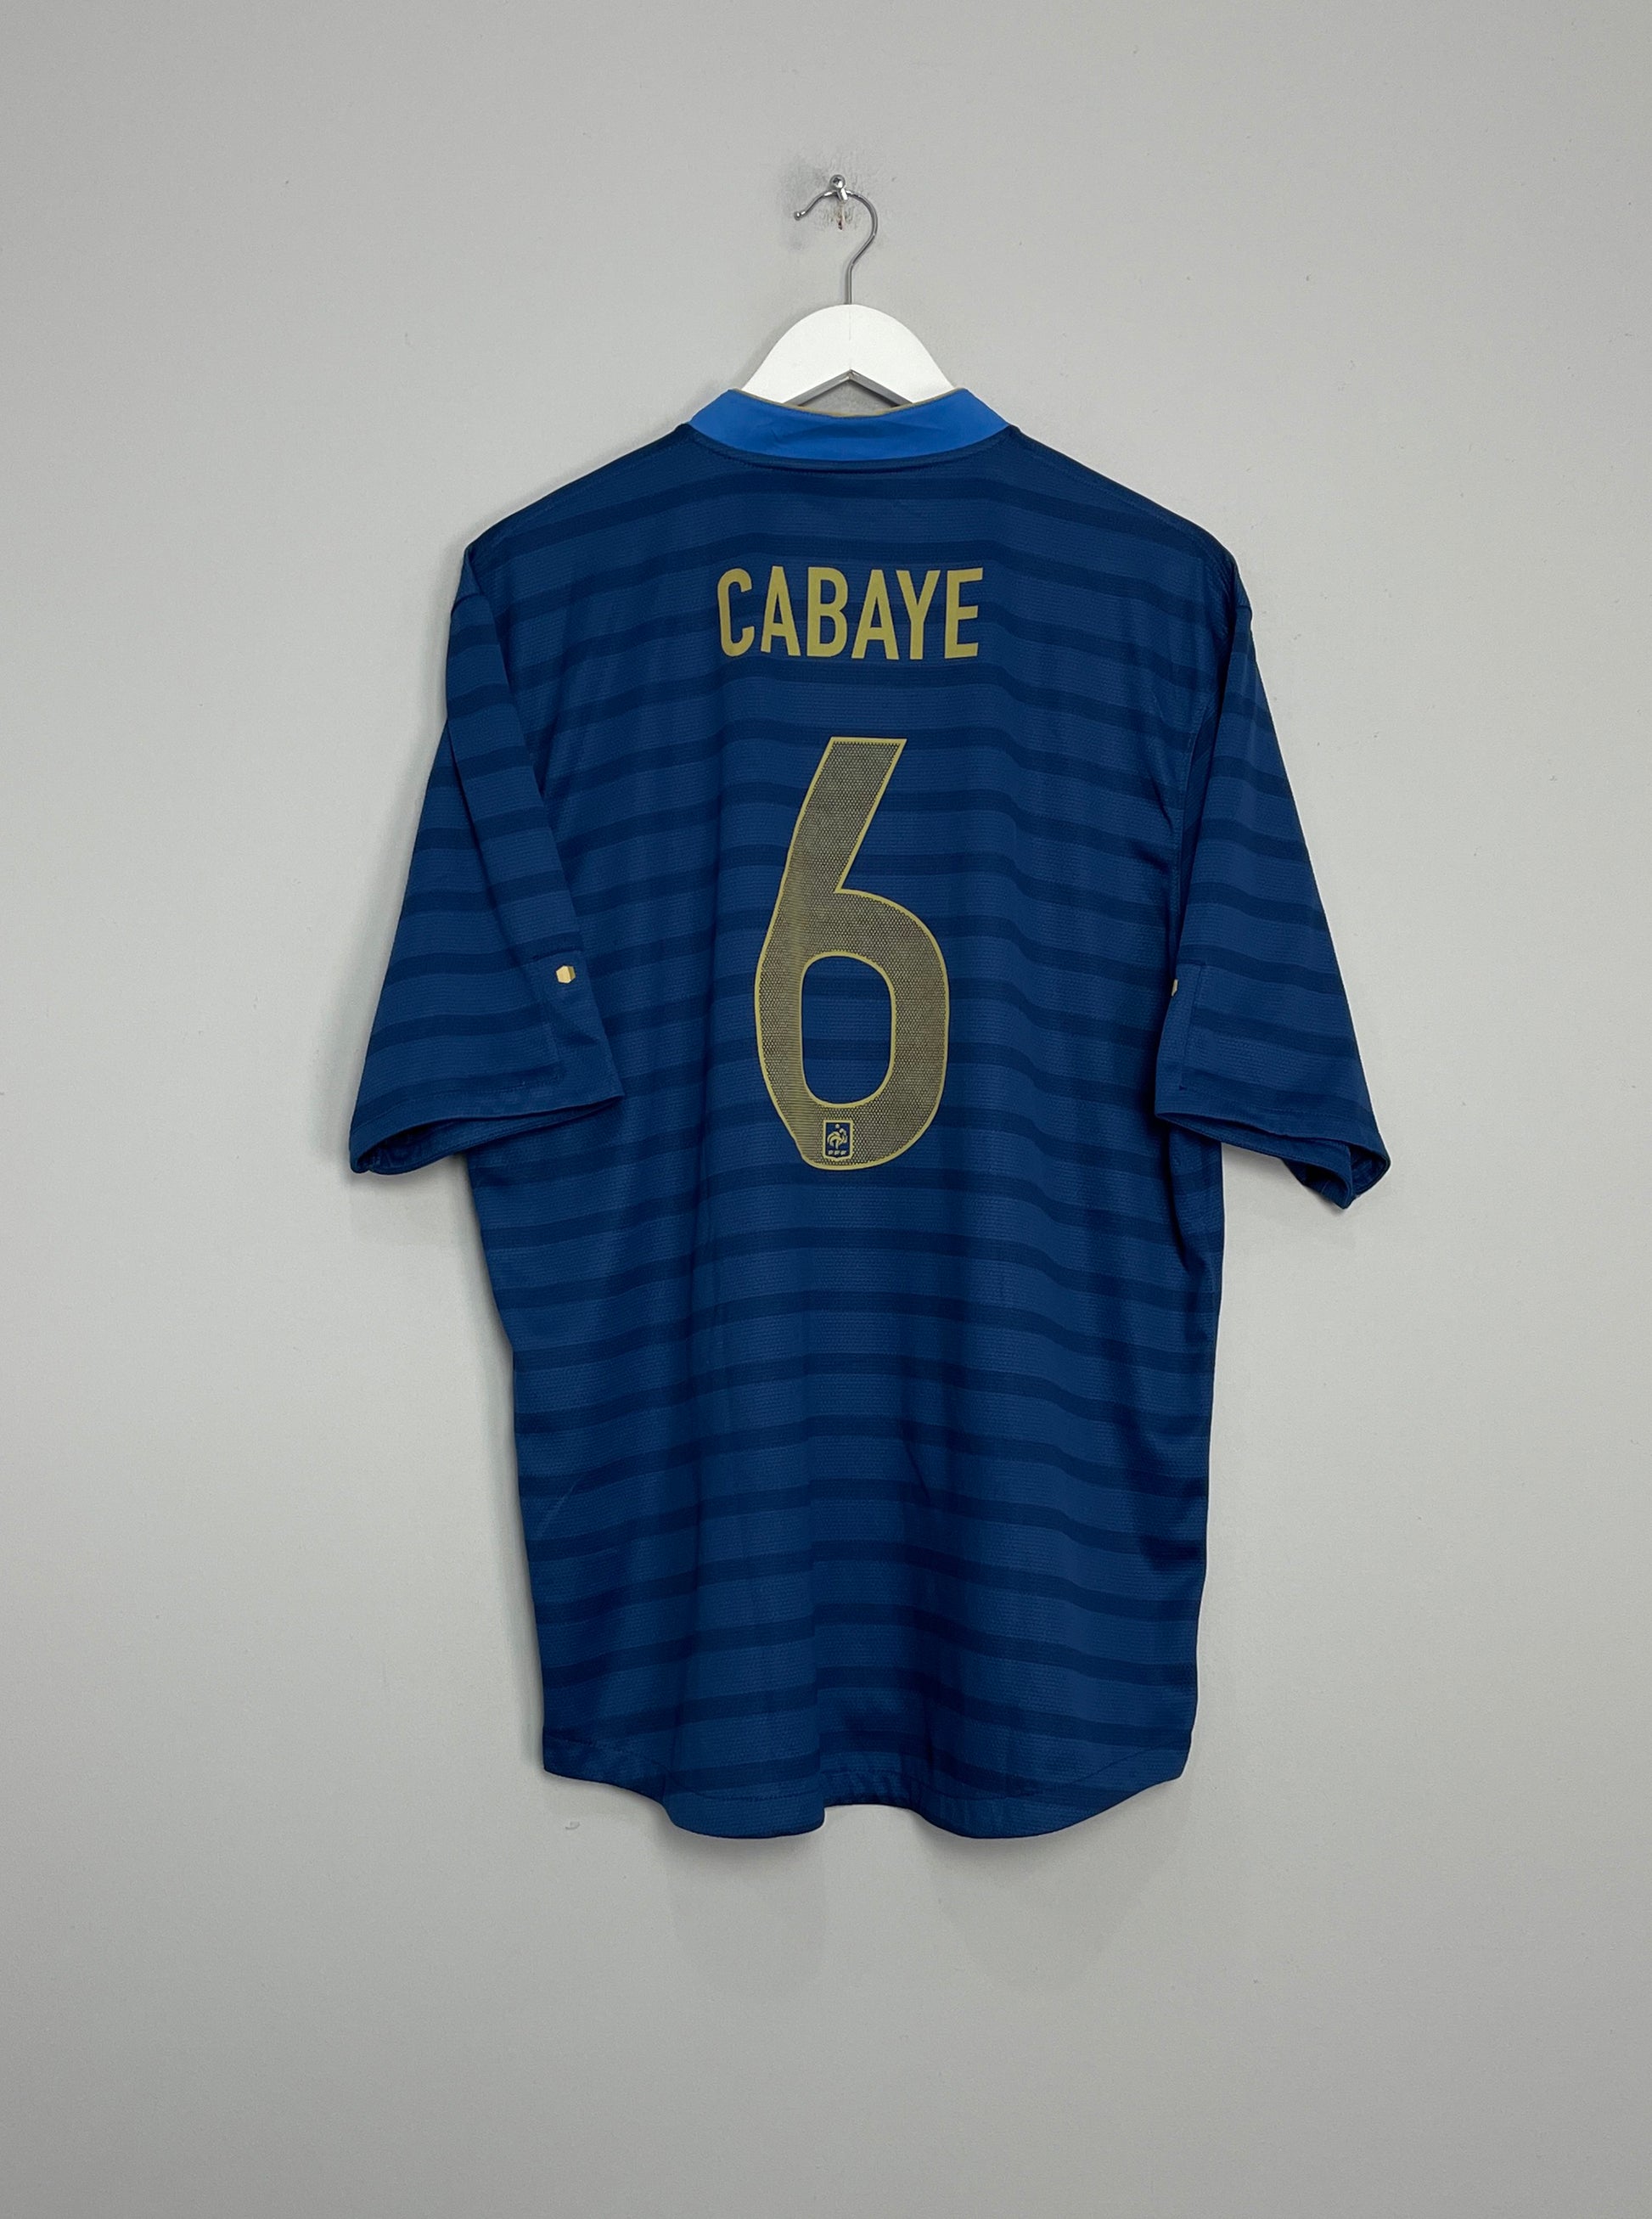 Image of the France Cabaye shirt from the 2012/13 season